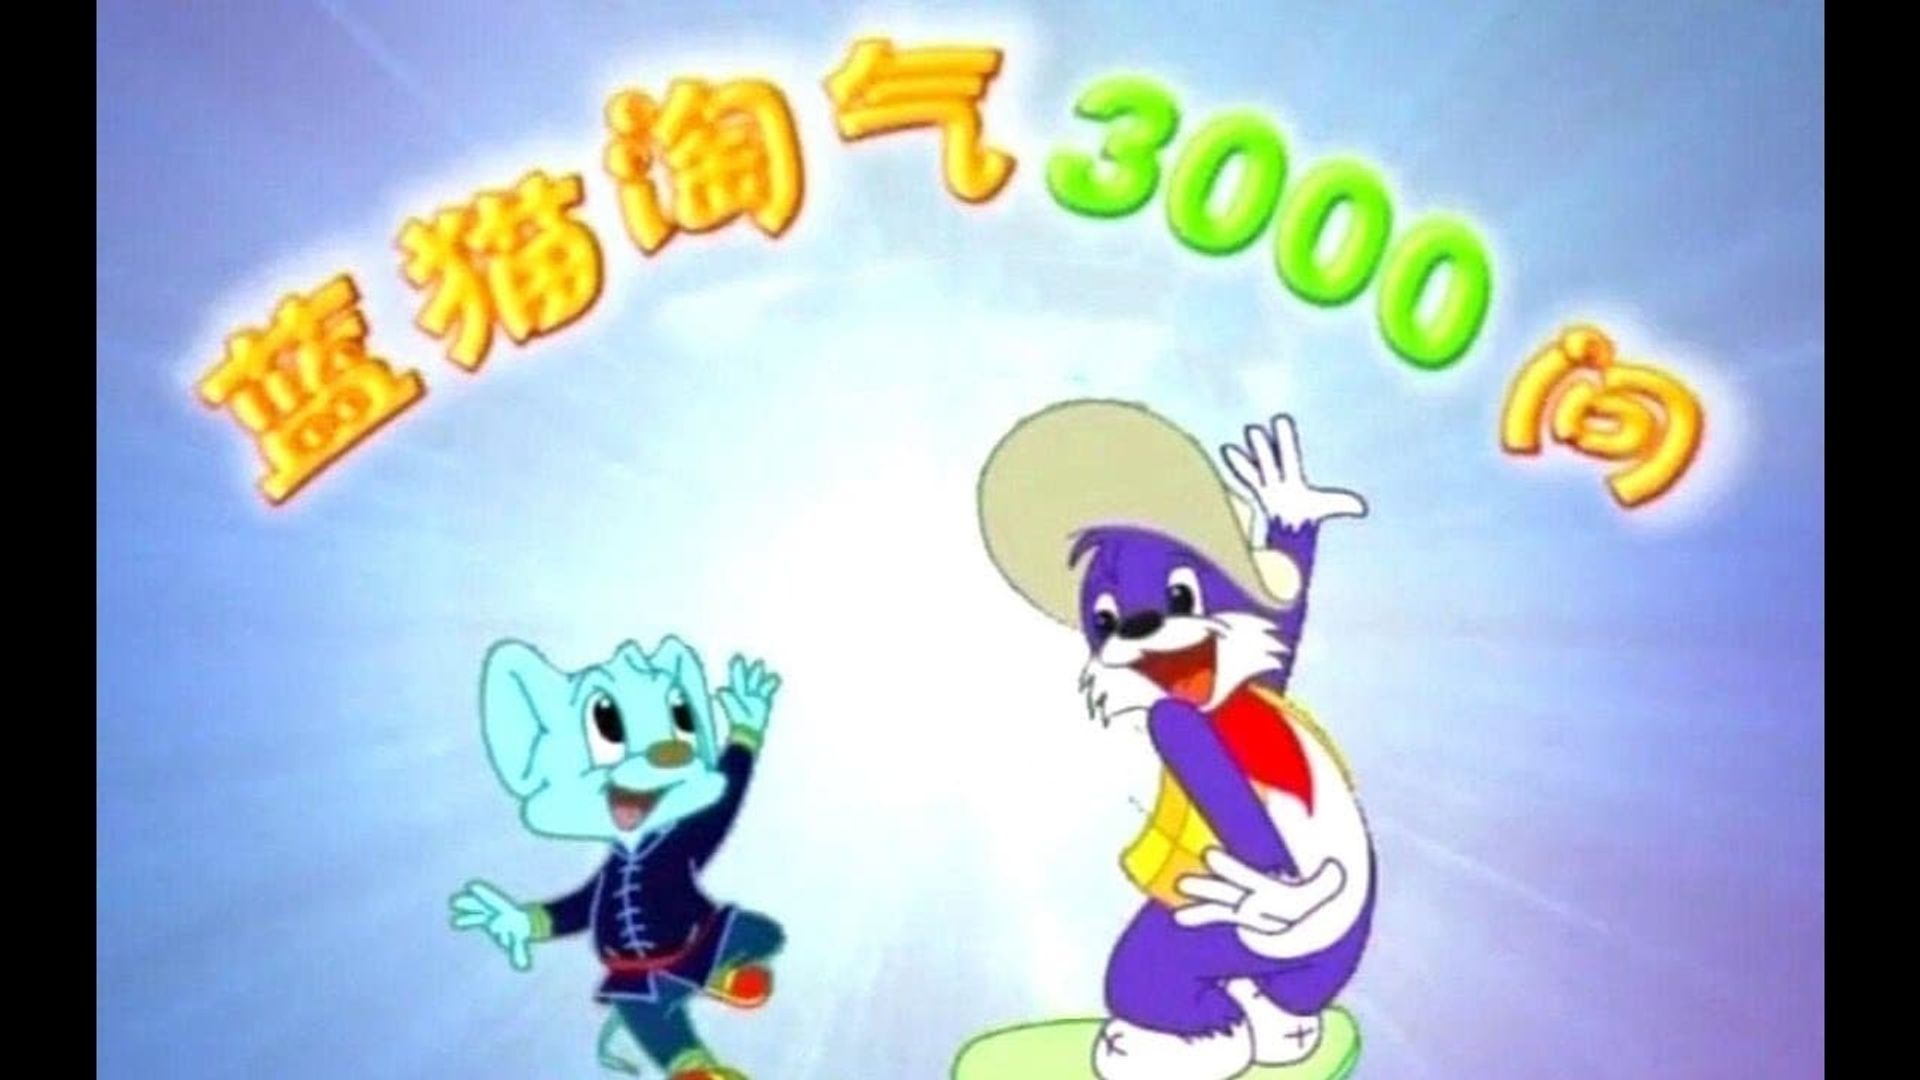 3000 Whys of Blue Cat background